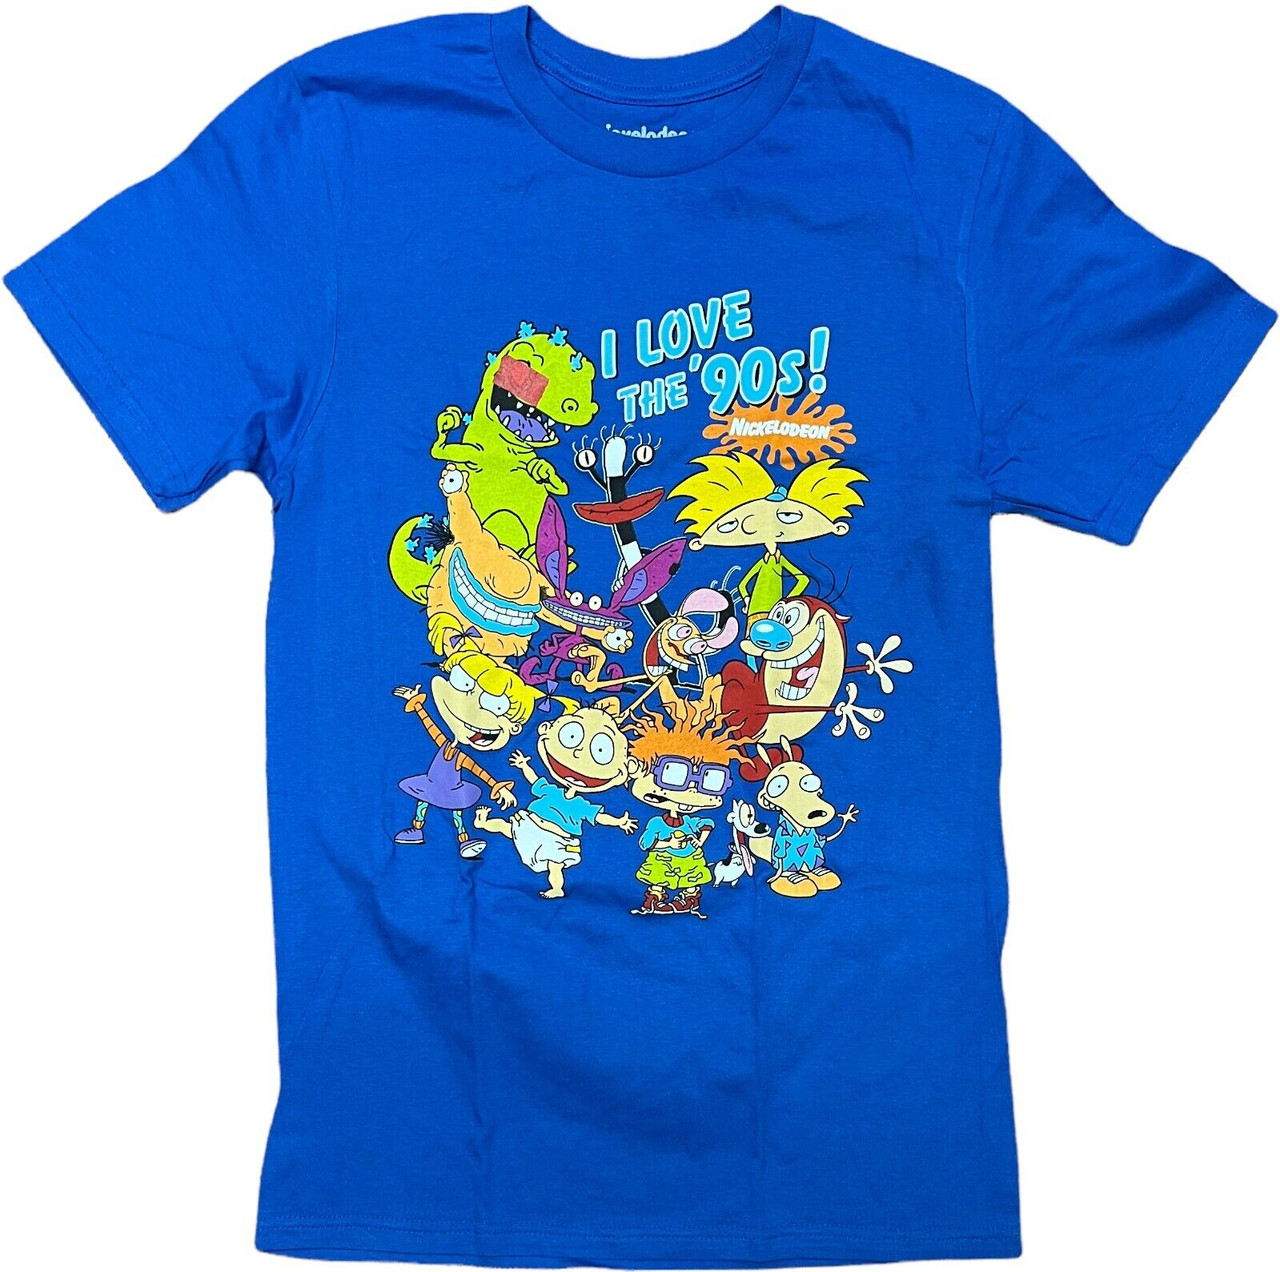 Nickelodeon T Shirt | escapeauthority.com